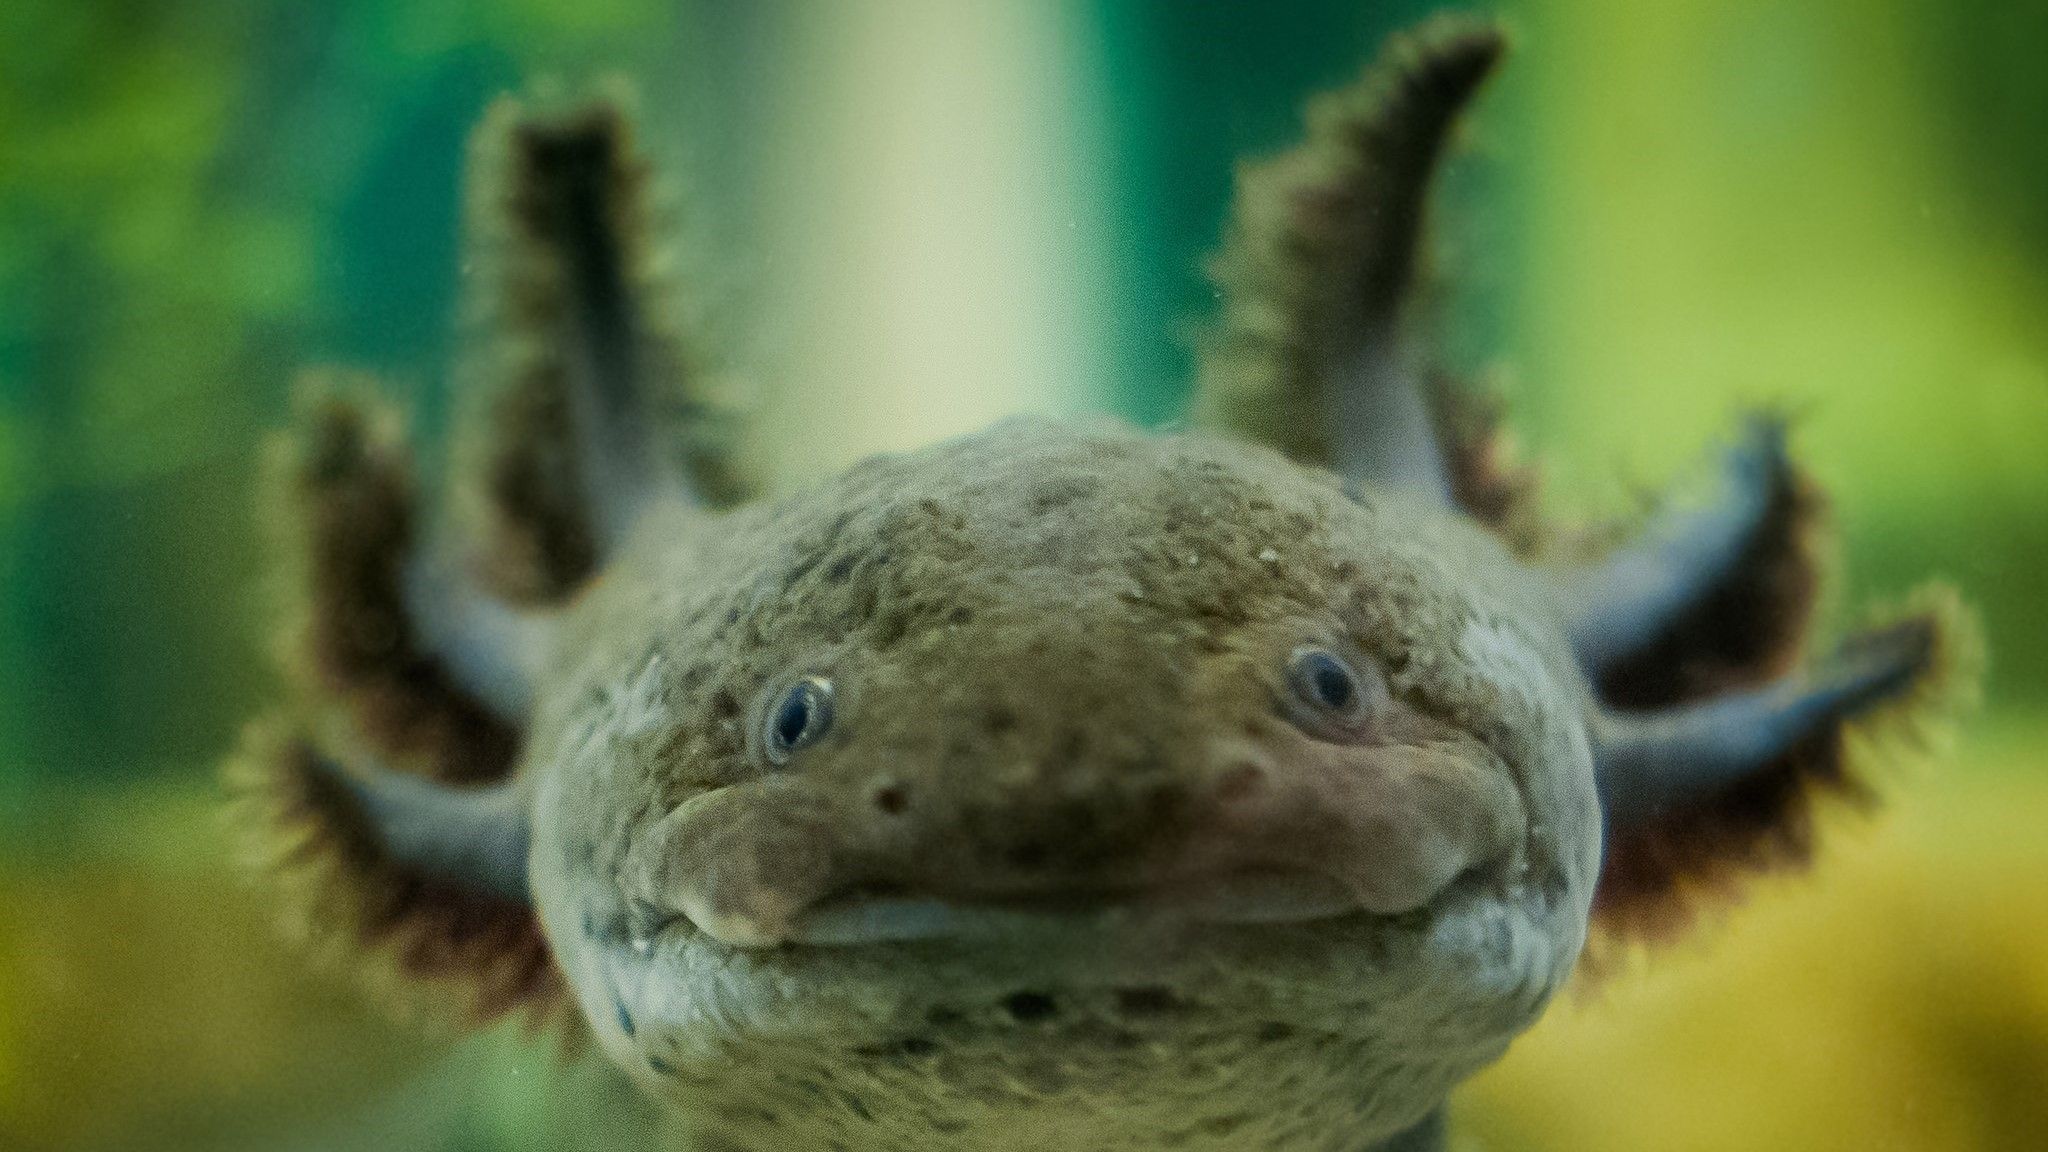 The Axolotl Can Grow Back It's Limbs. Ever Widening Circles